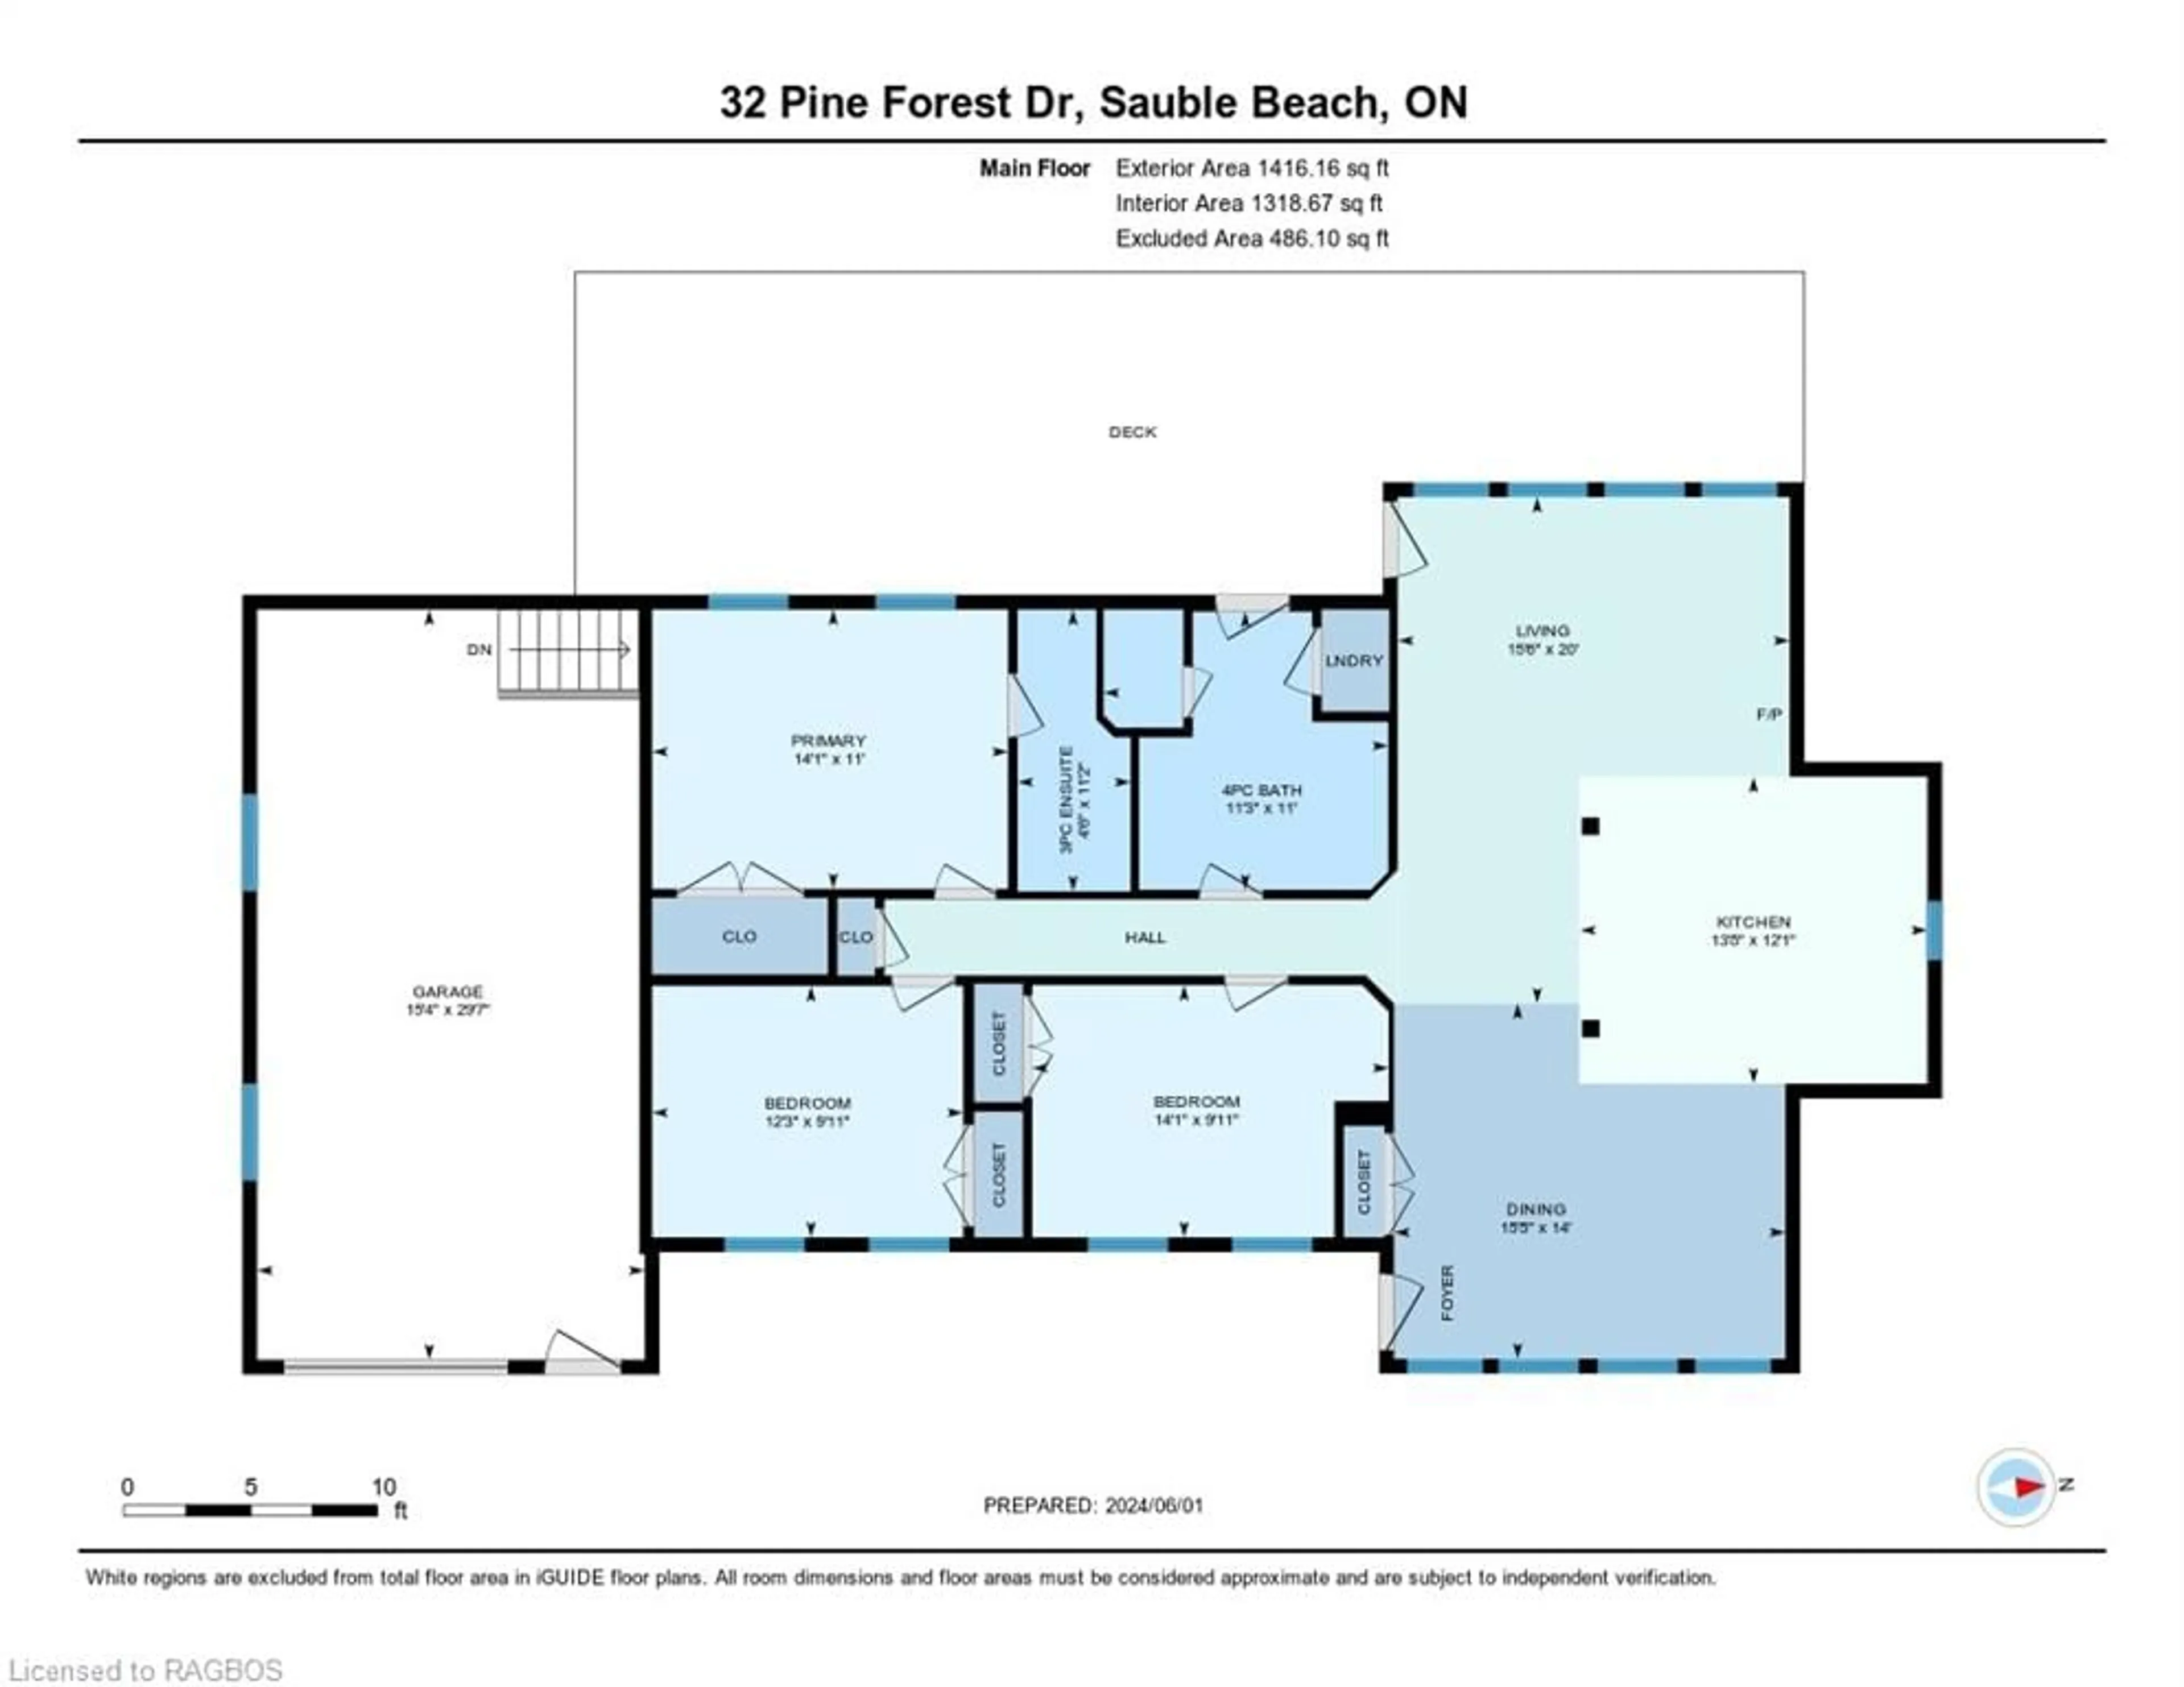 Floor plan for 32 Pine Forest Dr, Sauble Beach Ontario N0H 1P0